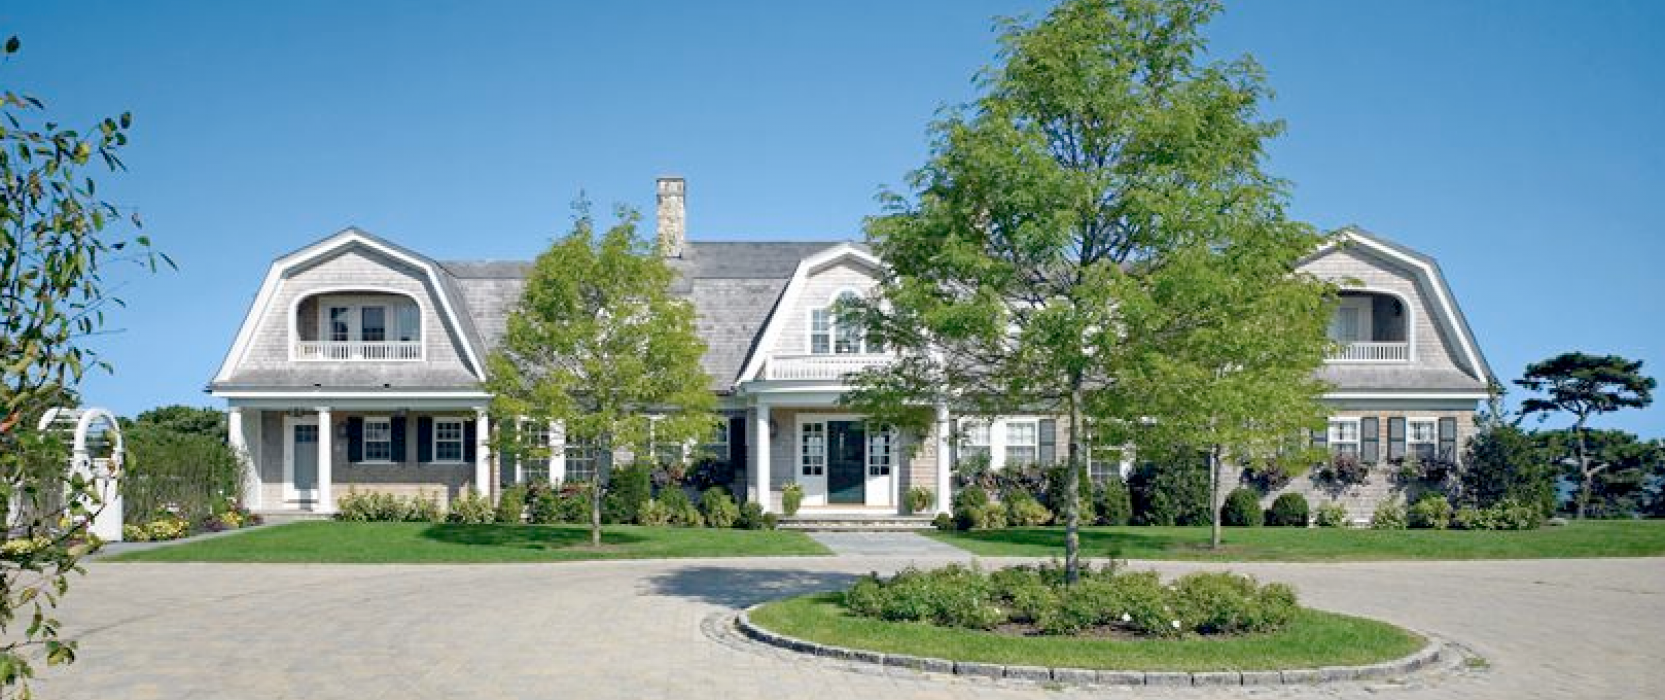 Patrick Ahearn's Edgartown Harbor House is Martha's Vineyard's Most Expensive Home Sale of 2014